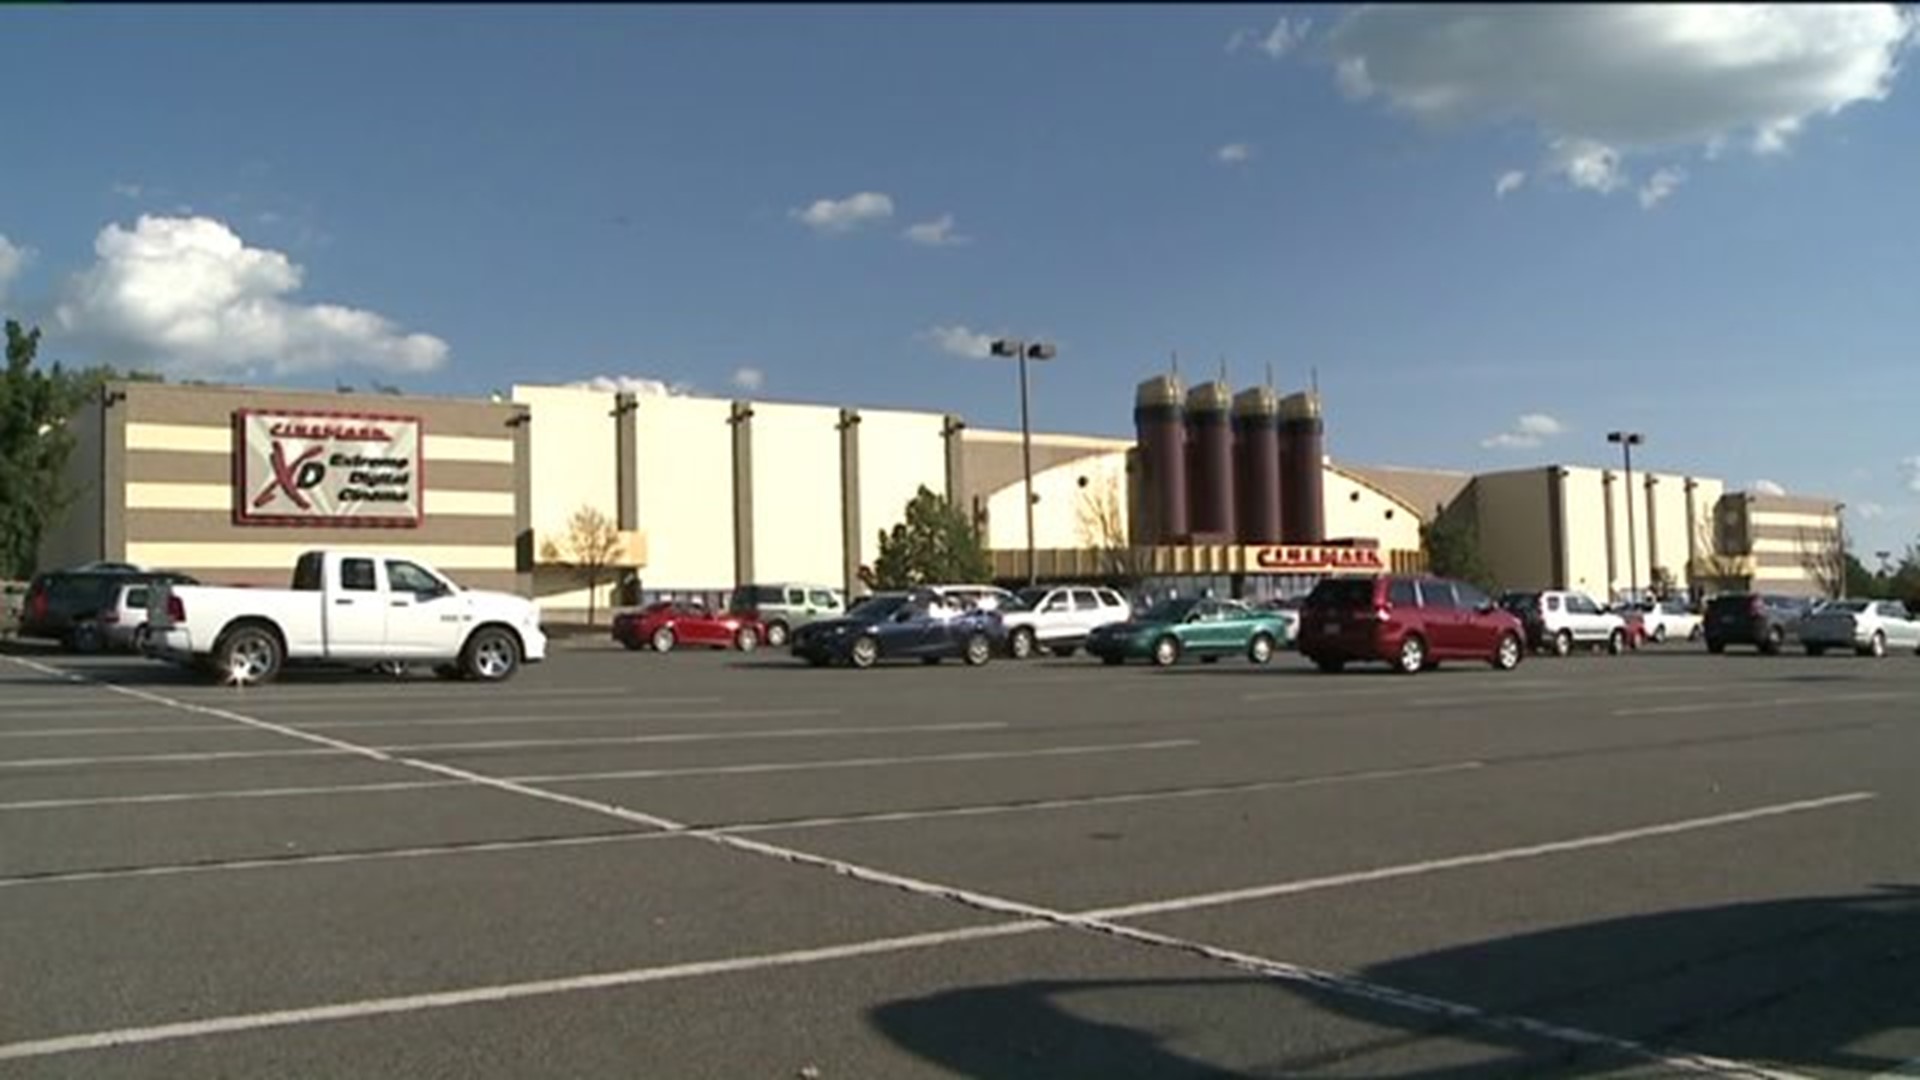 Moviegoers in Lackawanna County React to Theater Shooting in La.